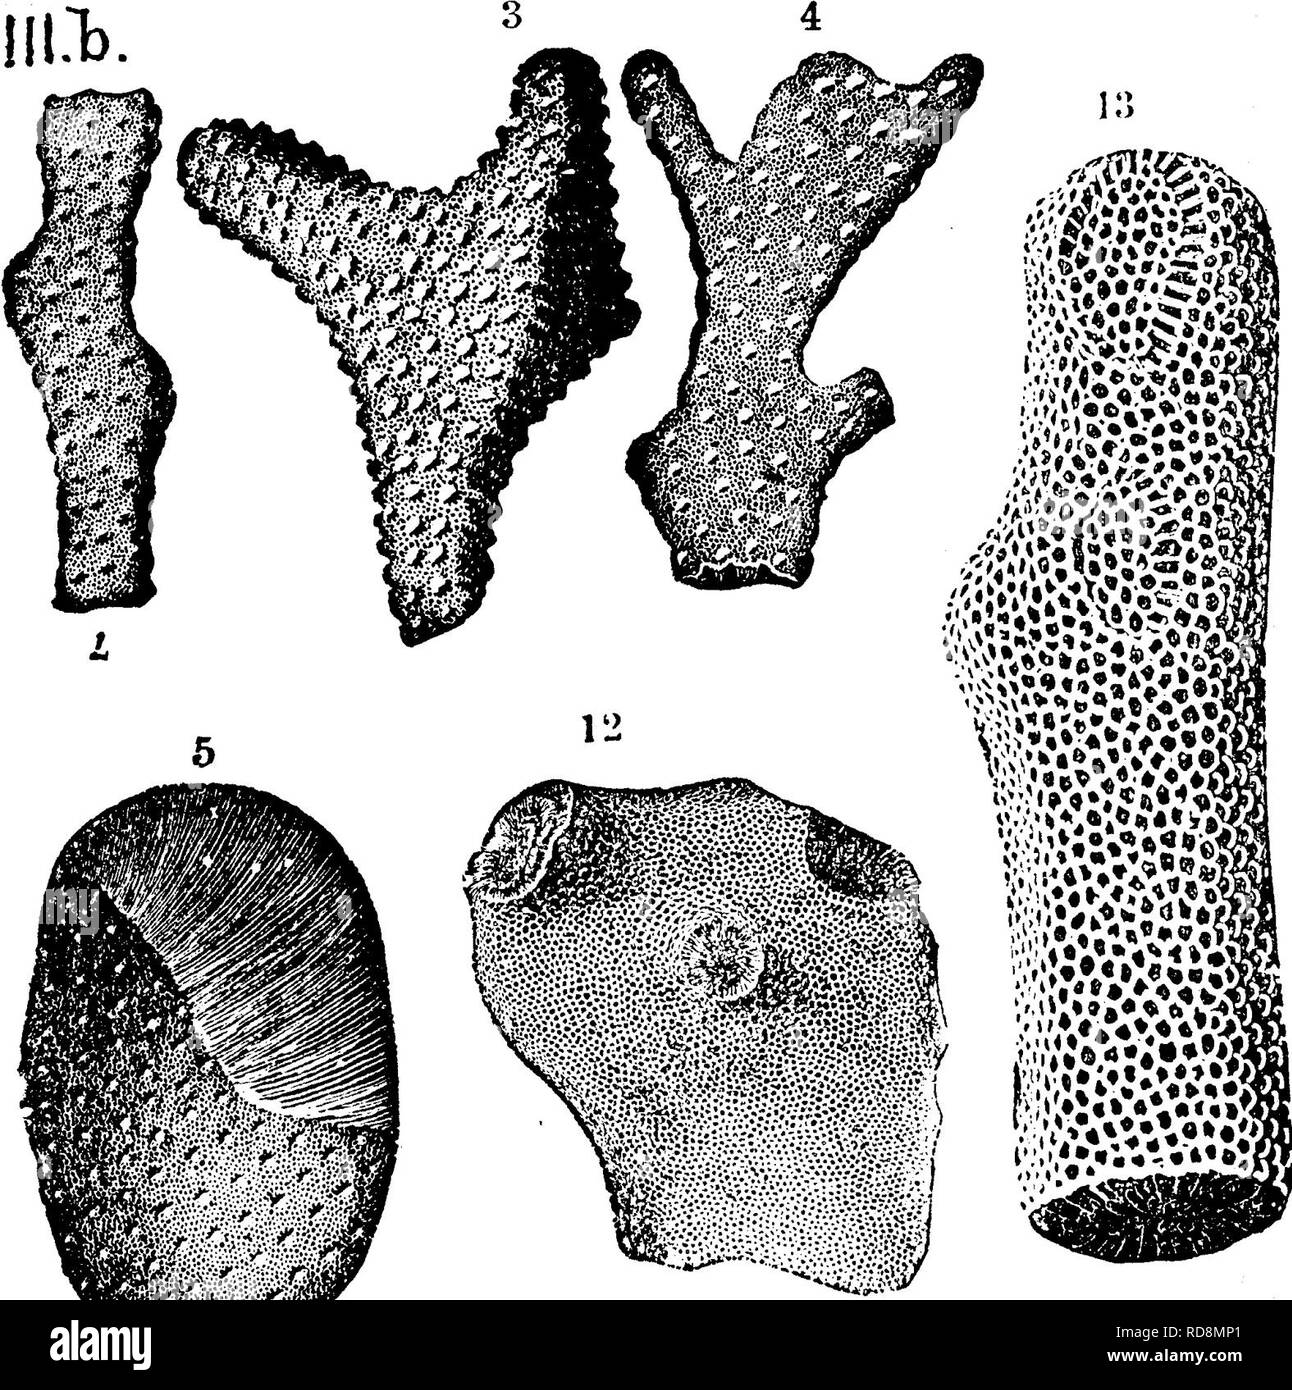 . A dictionary of the fossils of Pennsylvania and neighboring states named in the reports and catalogues of the survey ... Paleontology. Monticulipora ulrichi. (Nicholson, Structure &amp; AfF. of Mont. 1881) Oollett's Indiana Report of 1882, page 249, plate xi, fig. 10, a small fragment.—Hudson River (Ginoinnati) formation, Illh.—S. A. Miller remarks here that he showed in Jour. Cin. Soc. N. H., Vol. 5, that Nicholson's six sub- 7^,155;^, ^'&quot;^^^^PXl ^£^?igr^ are of very little value. Monticulipora corals of undetermined species figured in Ool- lett's Indiana Rep o r t of 1882 (Van Clove's Stock Photo